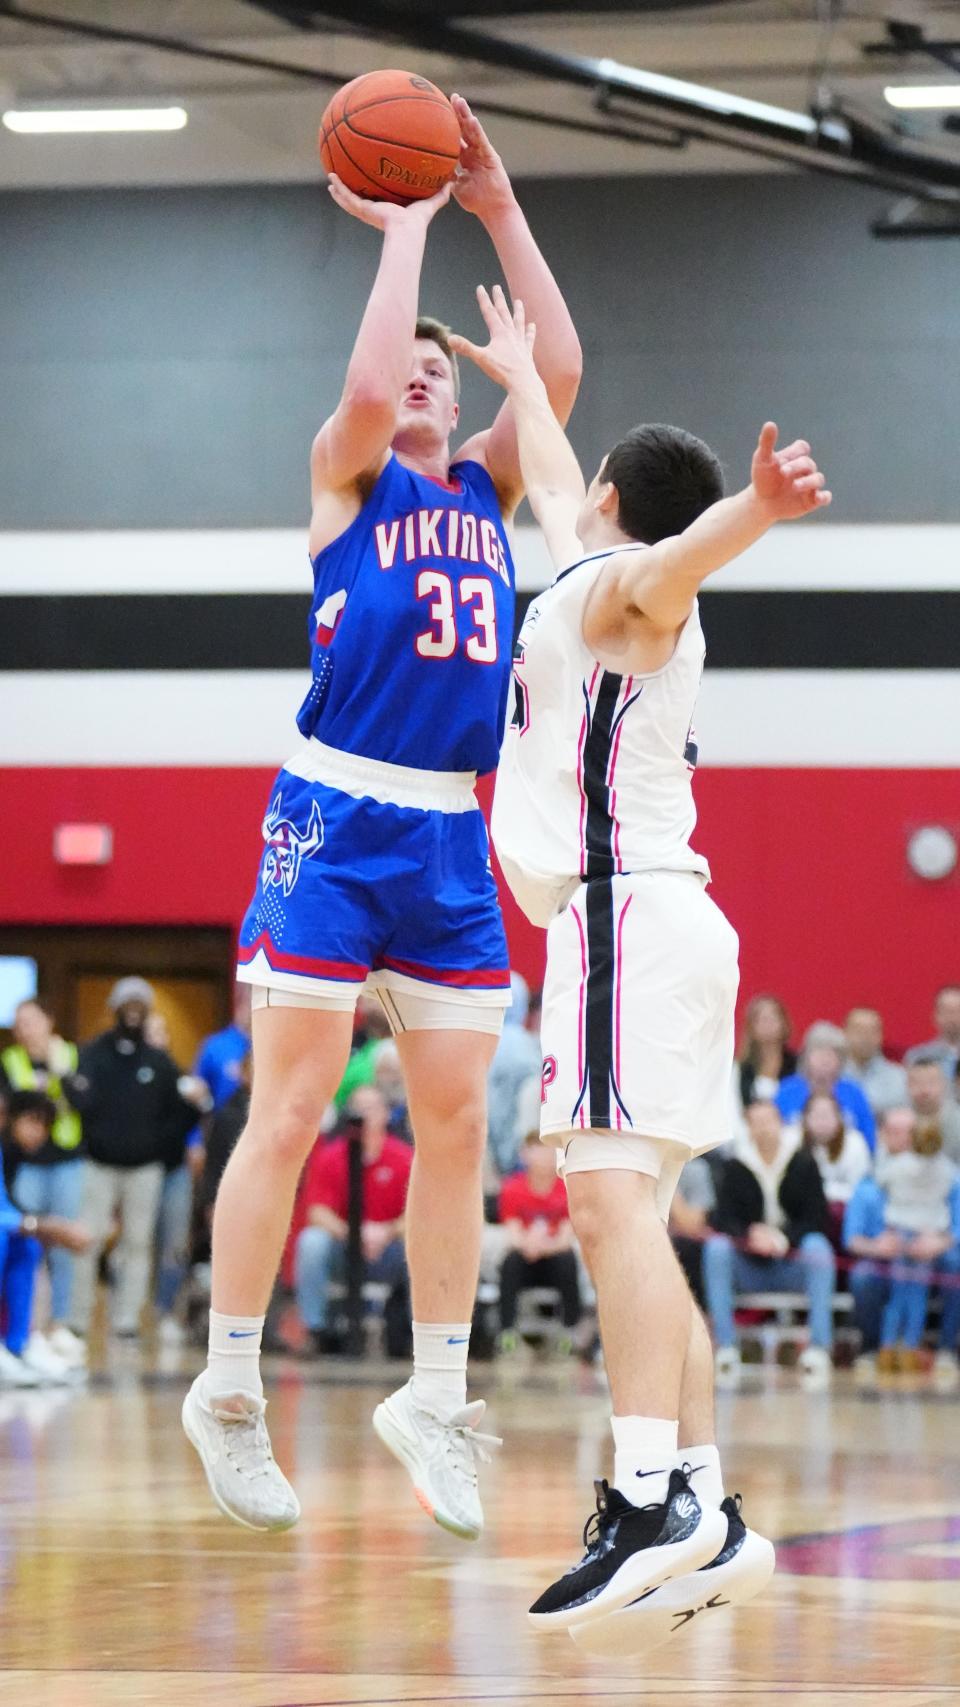 Wisconsin Lutheran's Kon Knueppel (33) and Pewaukee's Nick Janowski are both strong candidates to win the Wisconsin Basketball Coaches Association Mr. Basketball award.